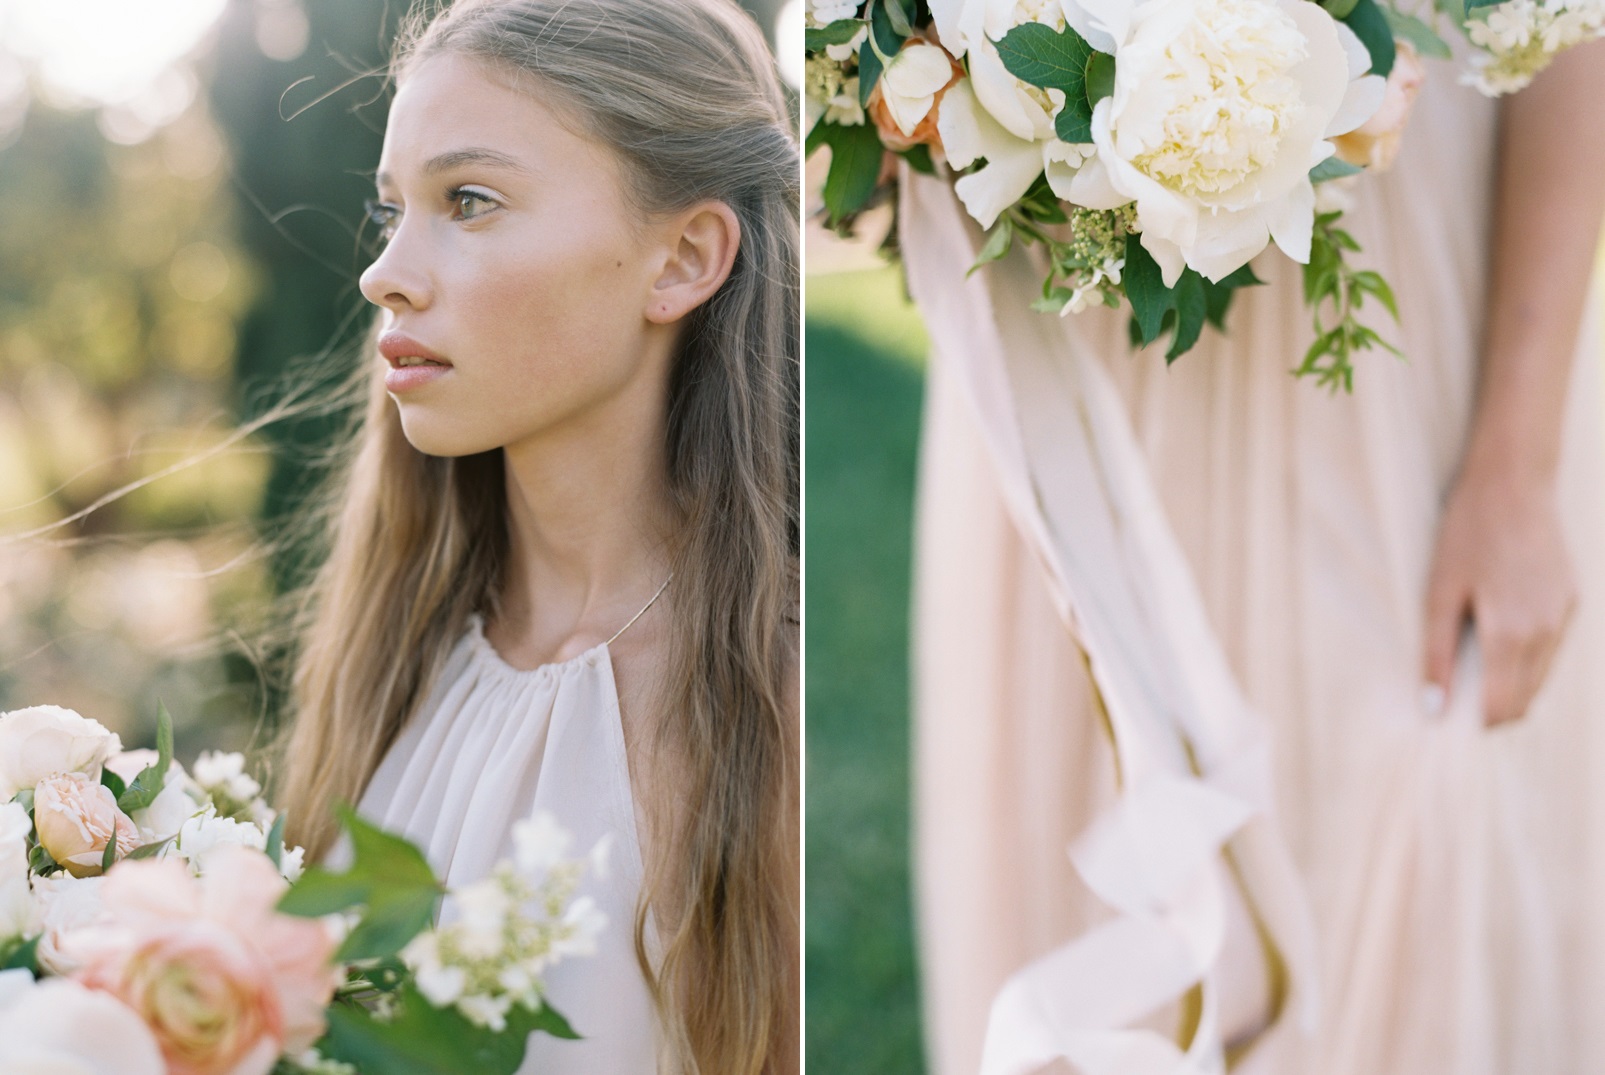 Blush Bridesmaid - Dreamy Garden Wedding Inspiration with a Hint of Provence